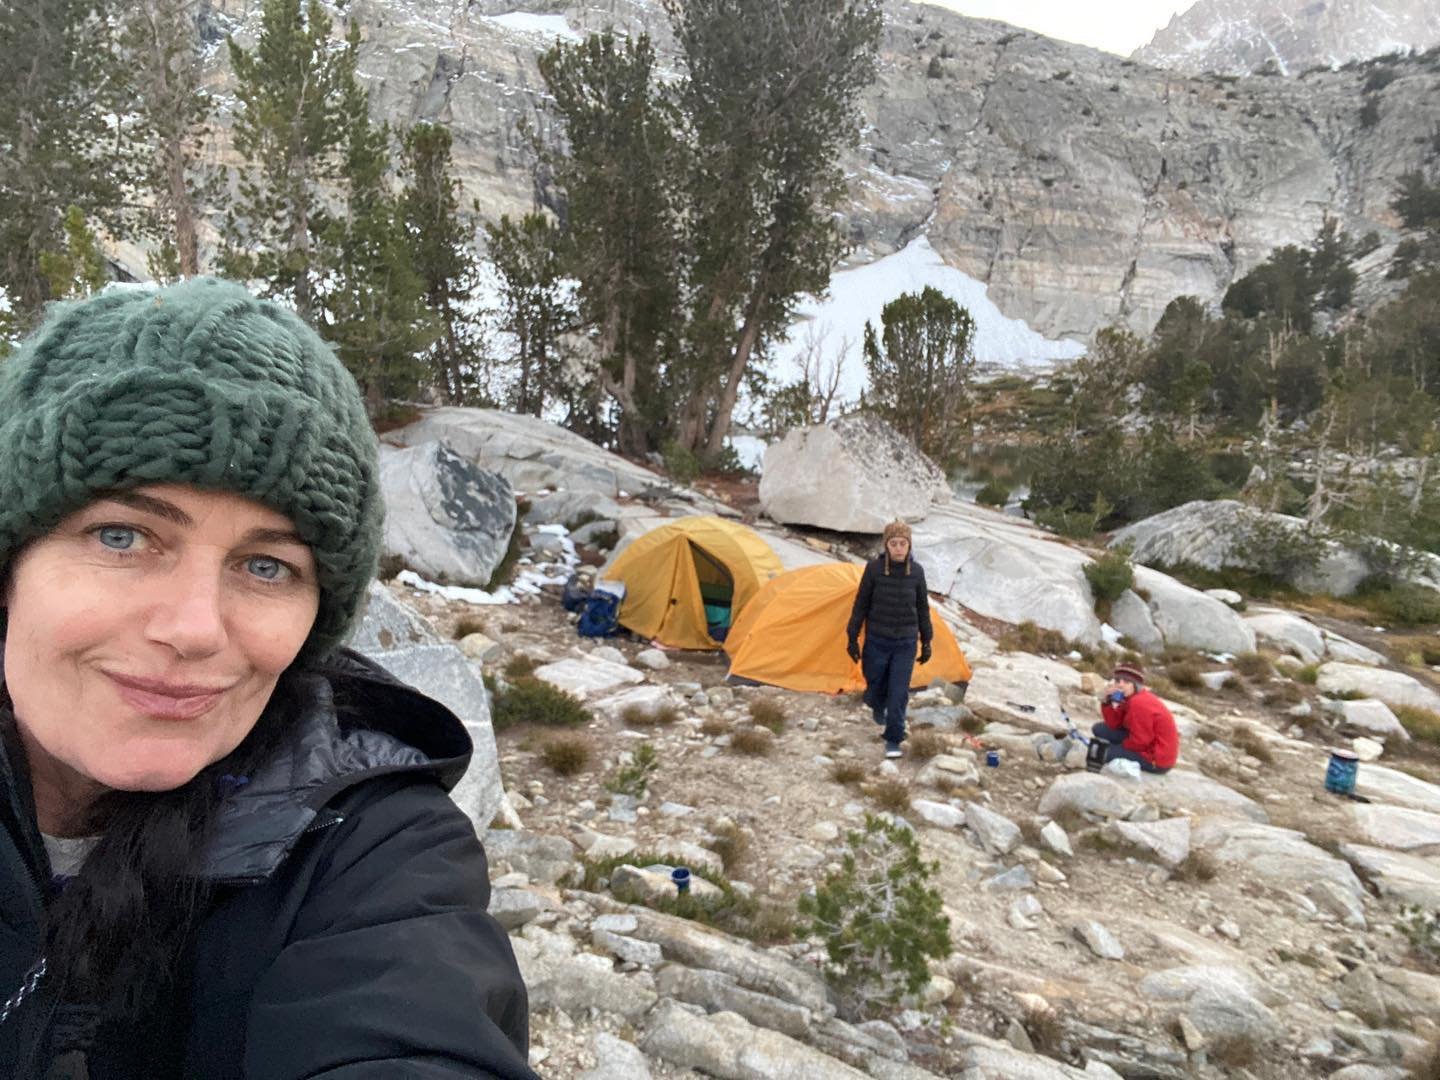 Went backpacking.  We camped at 11,000 feet and got snowfall on our descent.  Our lungs and hearts are full! Legs like spurtles. ❤️🙏🏼